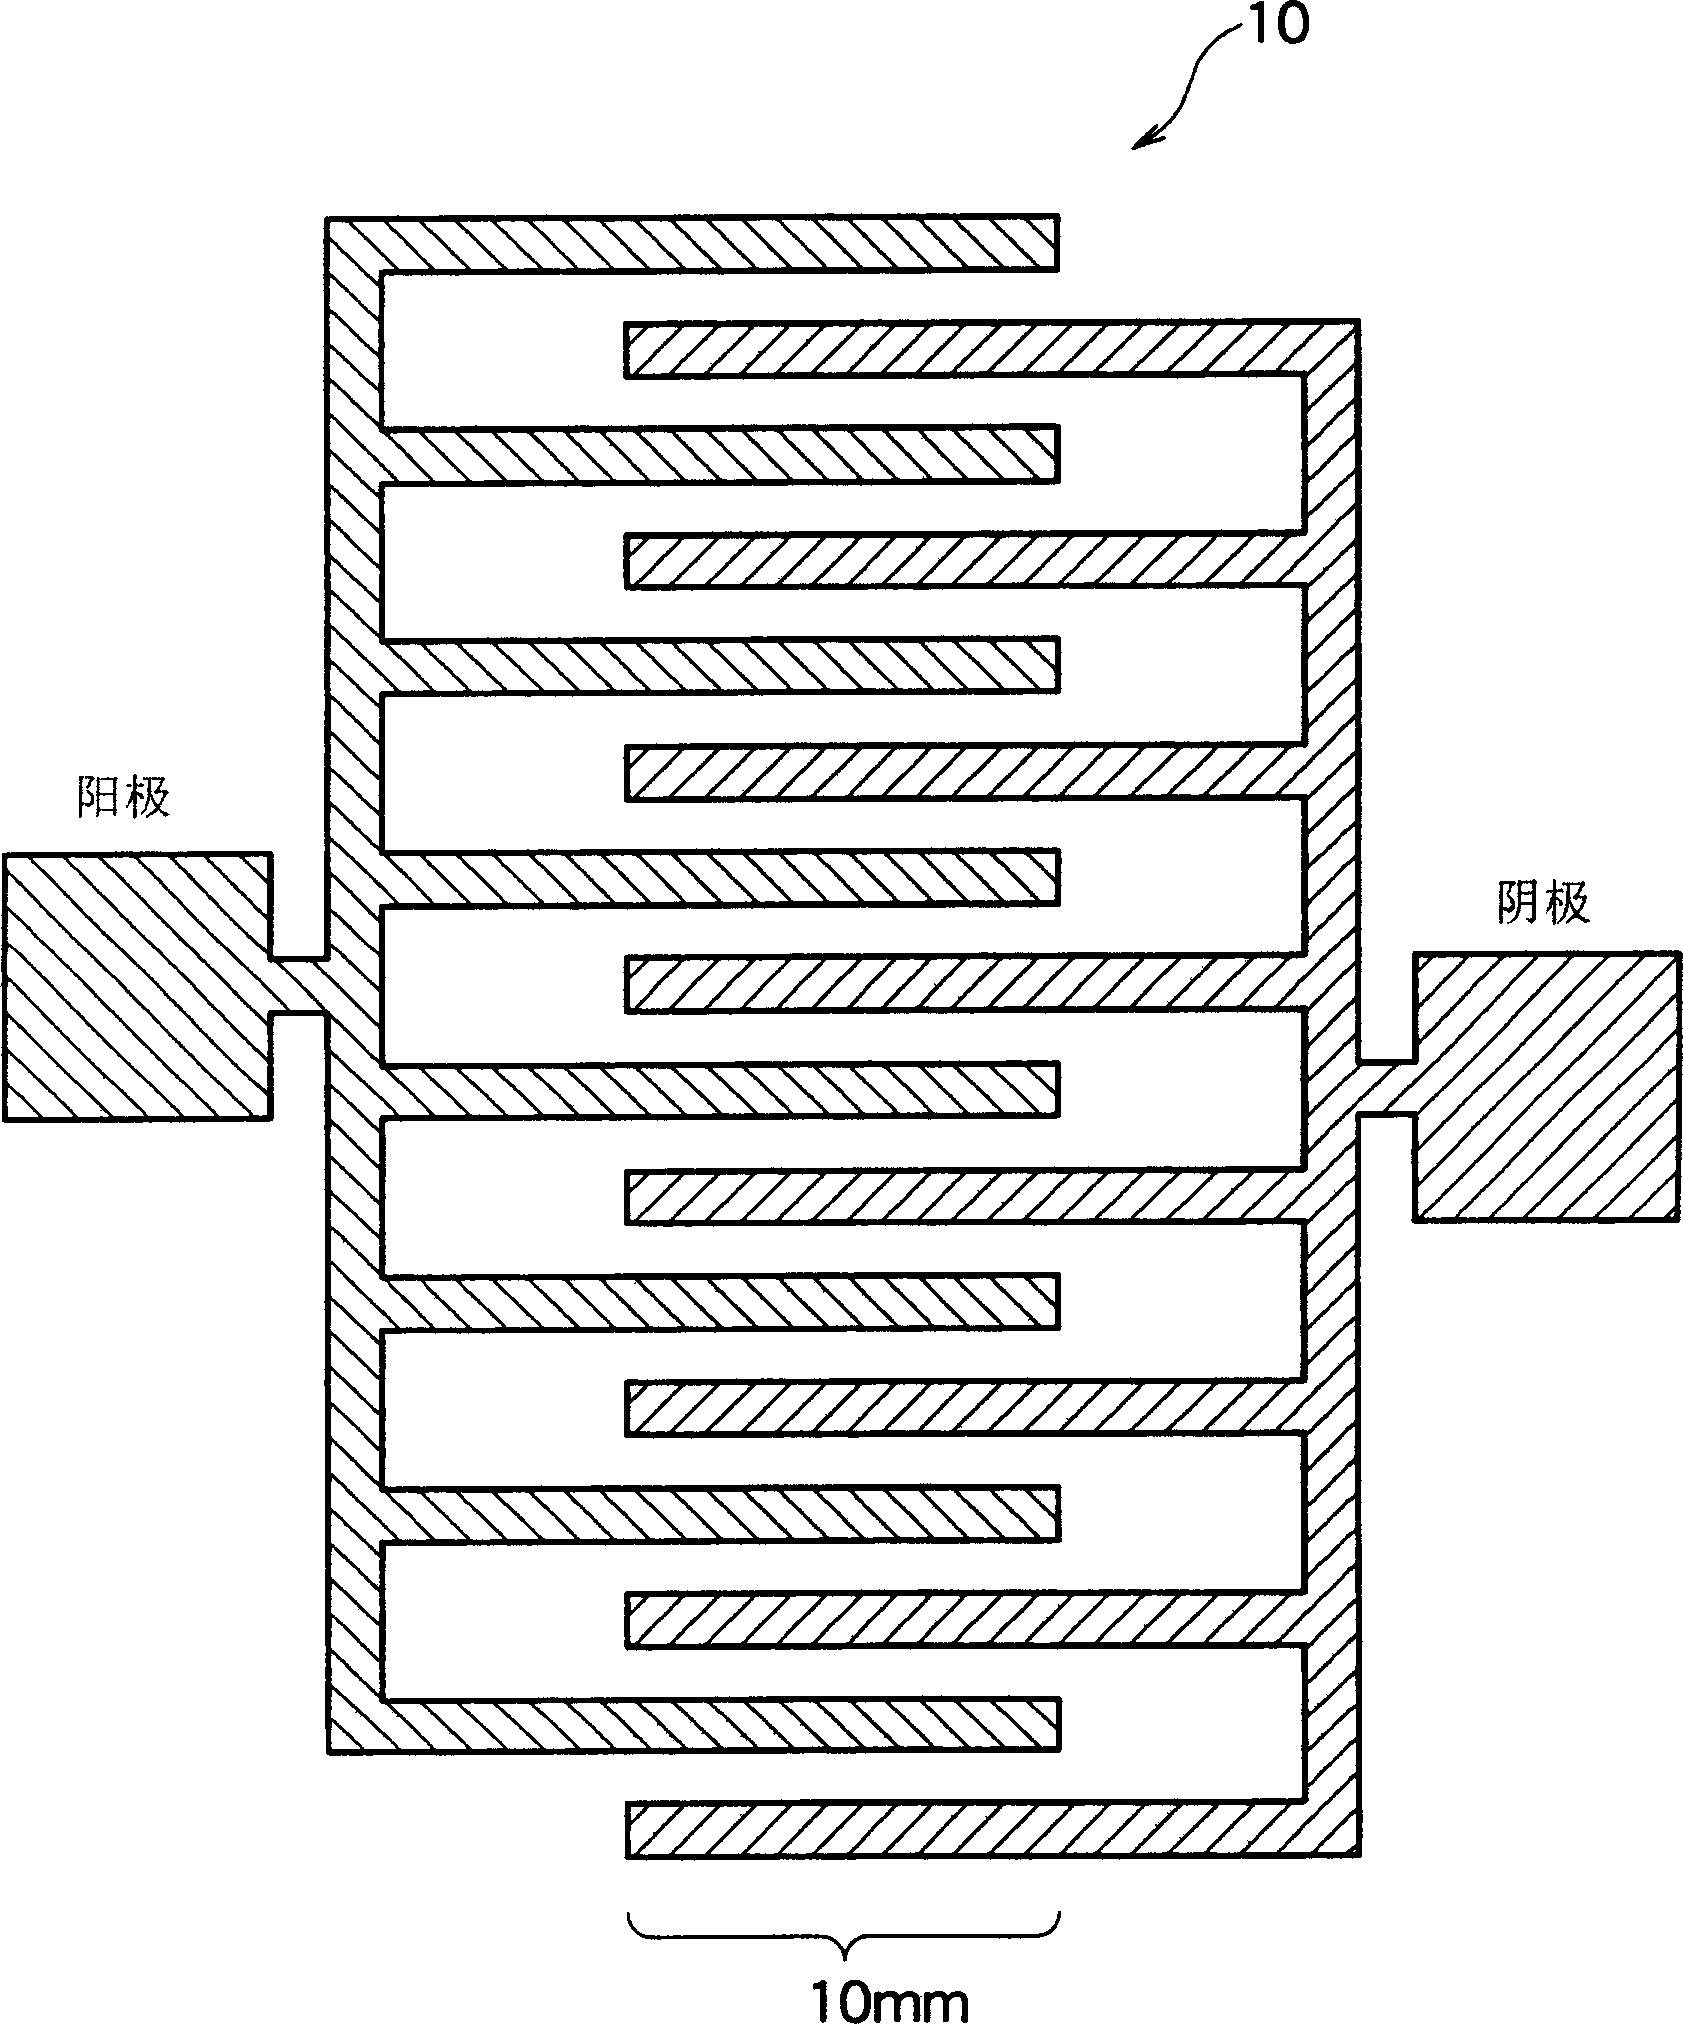 Electroplating pretreatment solution and electroplating pretreatment method